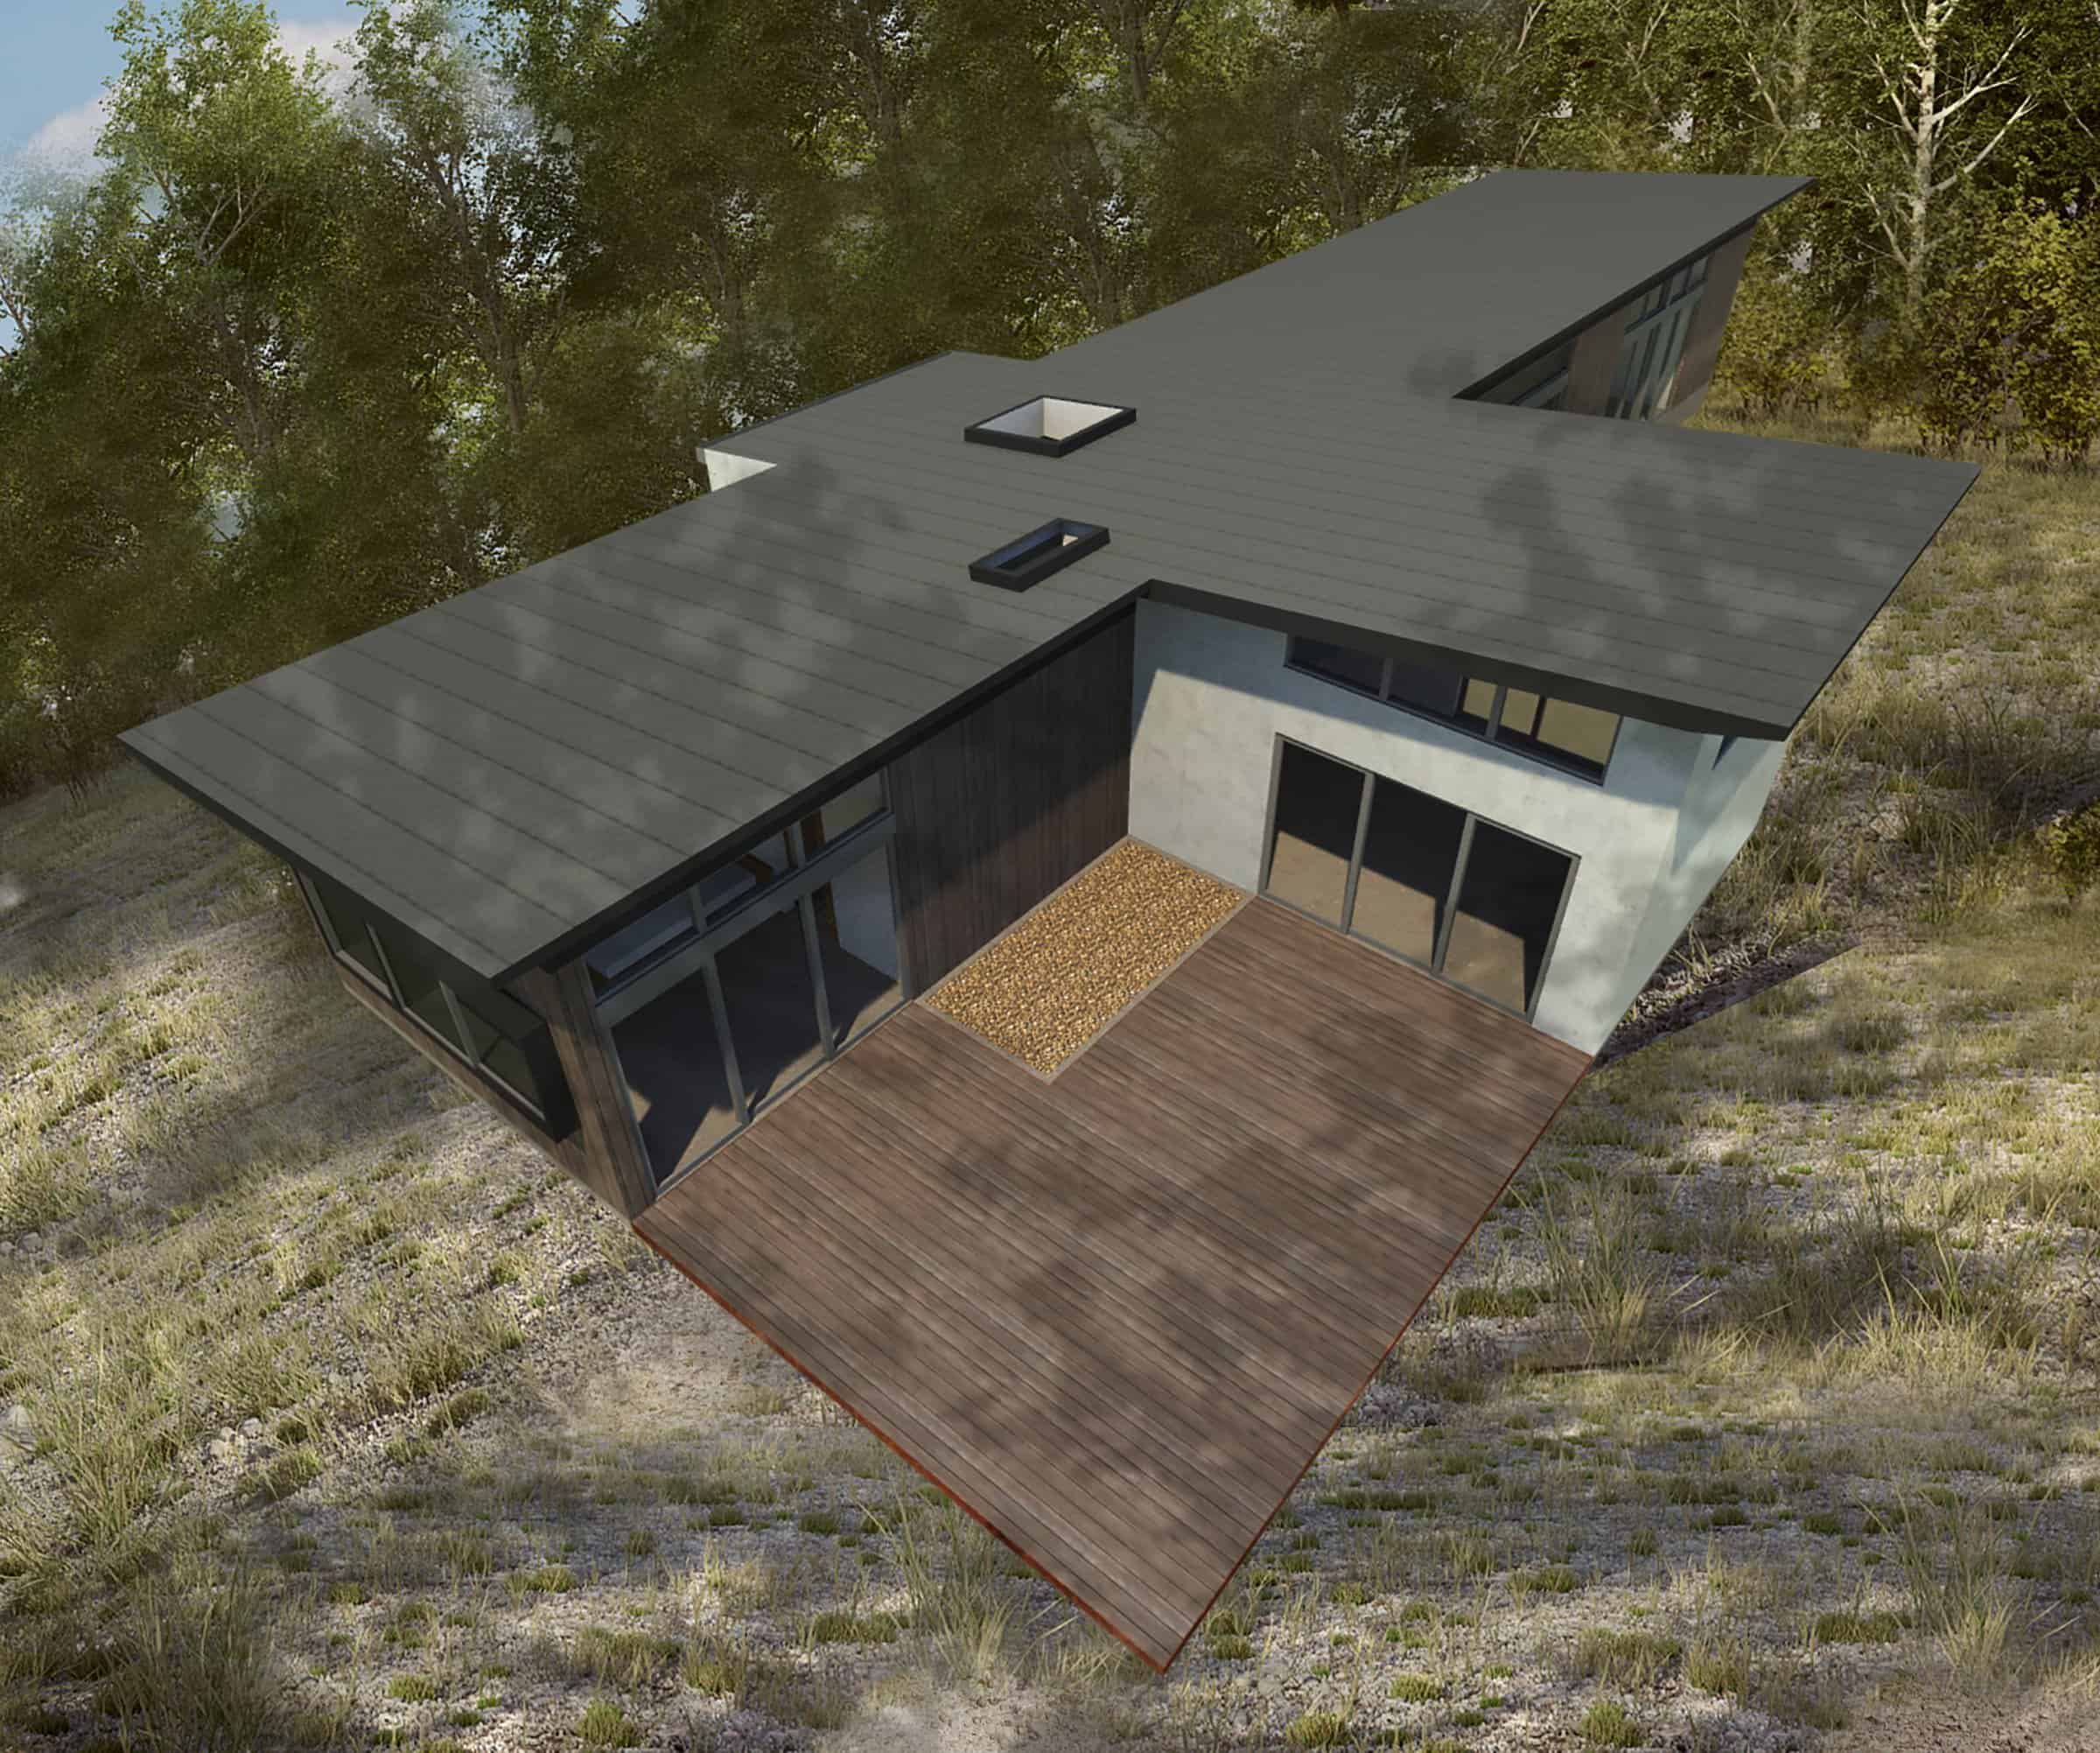 Ma Modular T Plan modern prefab home model rendering showing roof and rear of home.